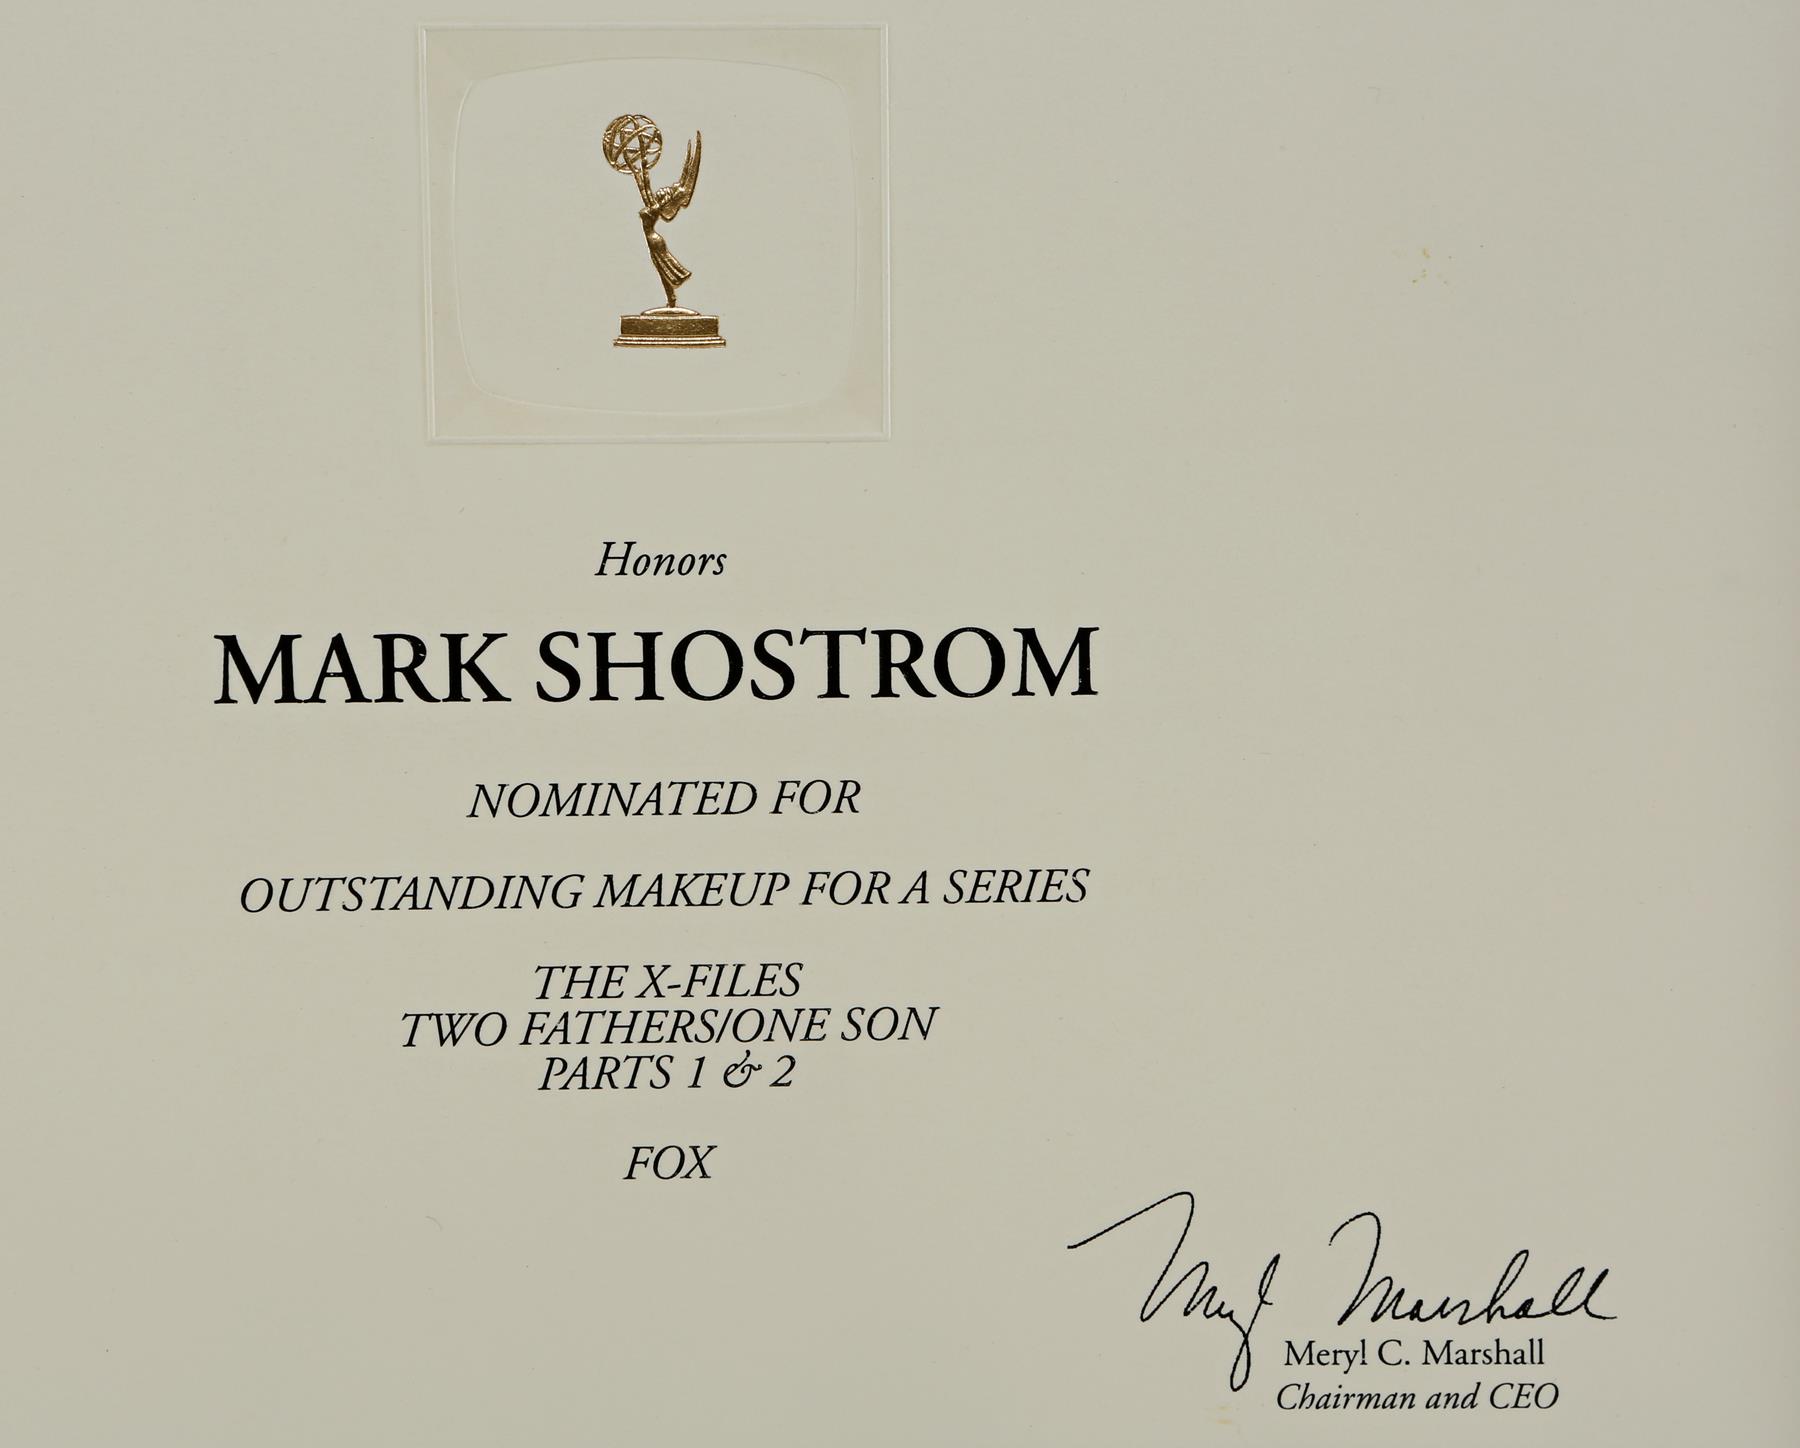 THE X-FILES (1993 - 2002) - Mark Shostrom’s Emmy Nomination Certificate ...